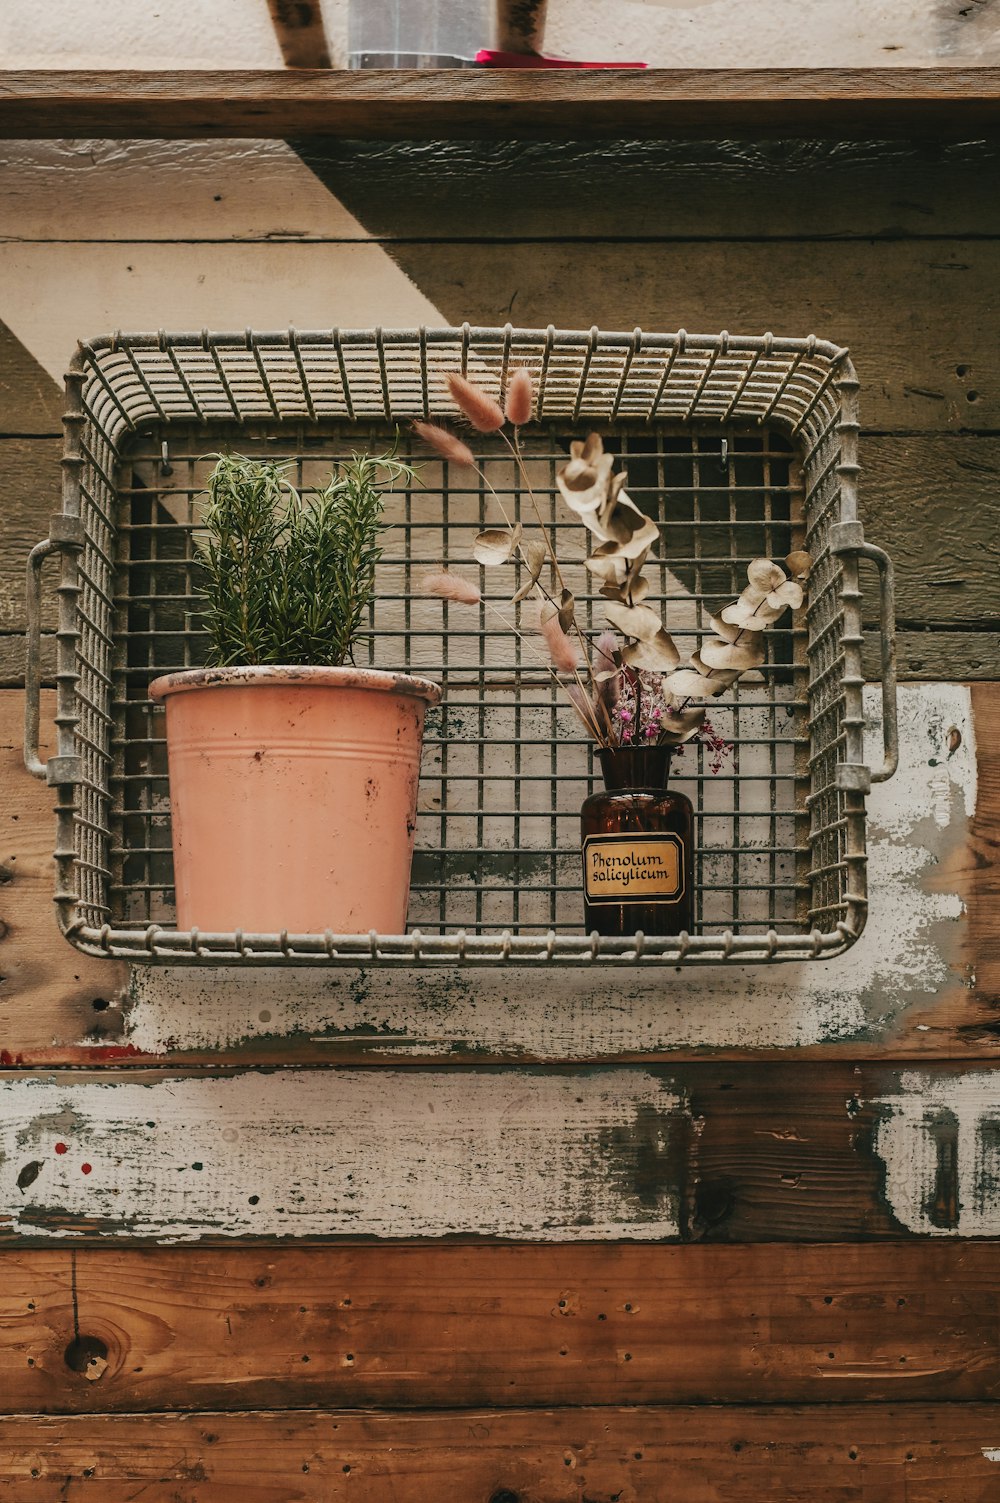 a metal basket holding a potted plant on a wooden wall